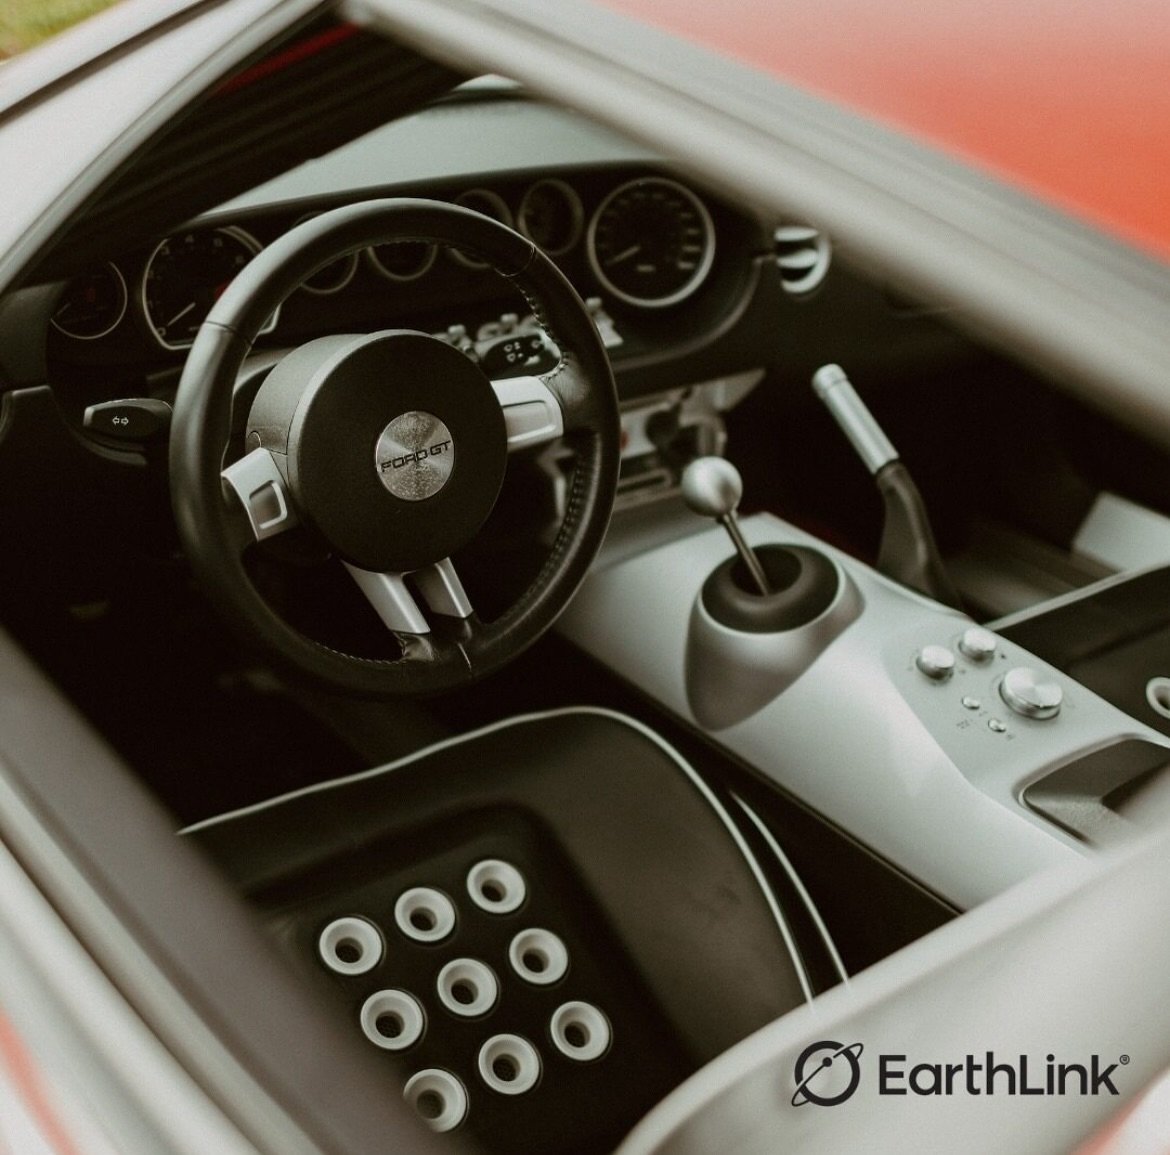 Supercharge your connection and go further with fiber internet 🏁🏁🏁

Join us at the EarthLink F1 Lounge during the main event on May 18th and stay up to speed with everything you need to know about the 2024 Emilia Romagna Grand Prix. 

@EarthLink @